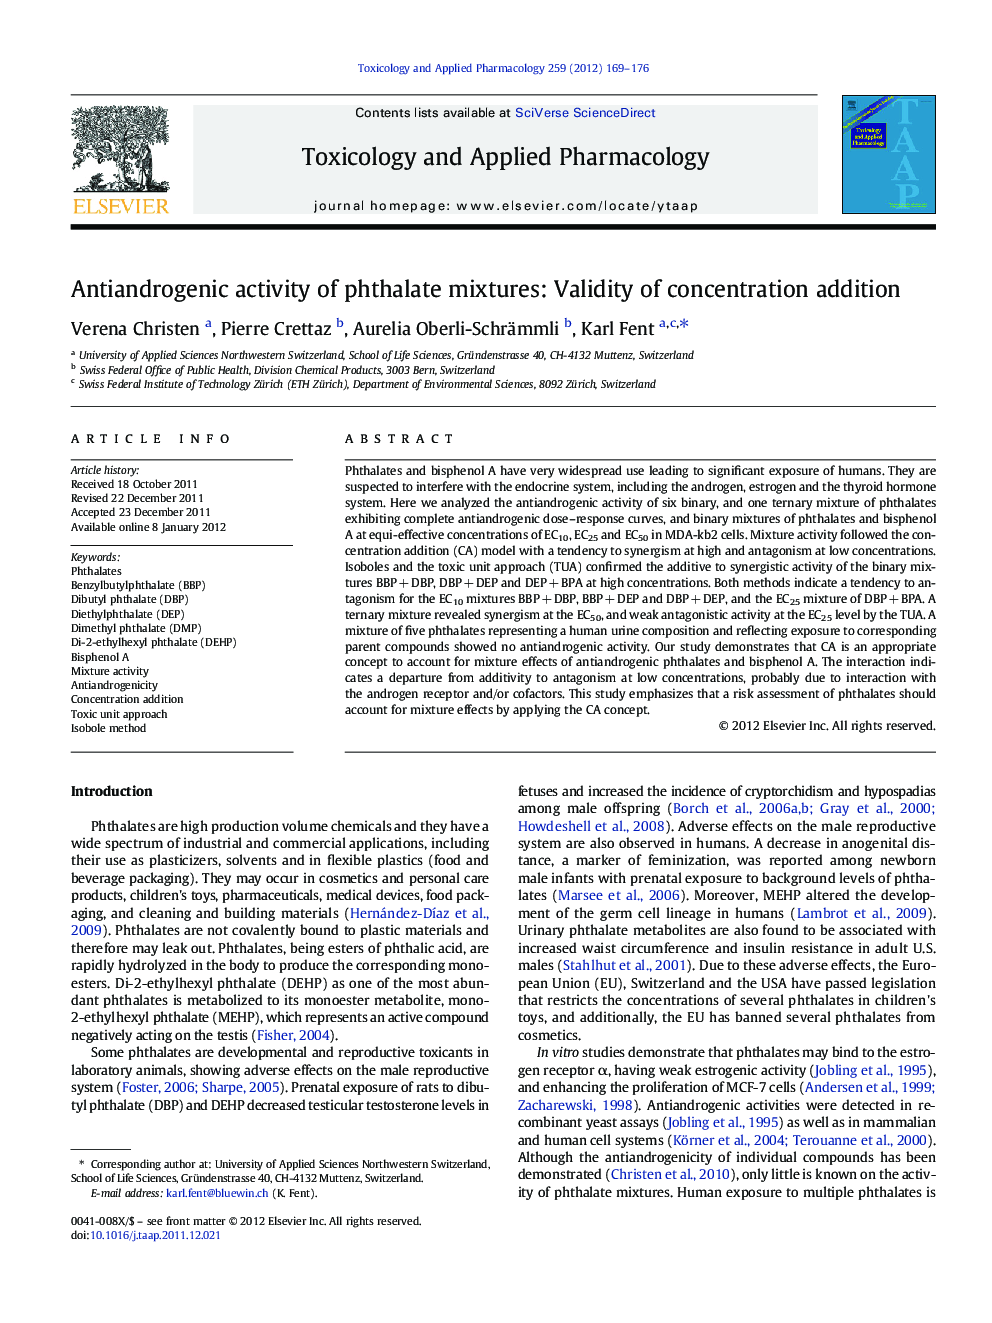 Antiandrogenic activity of phthalate mixtures: Validity of concentration addition